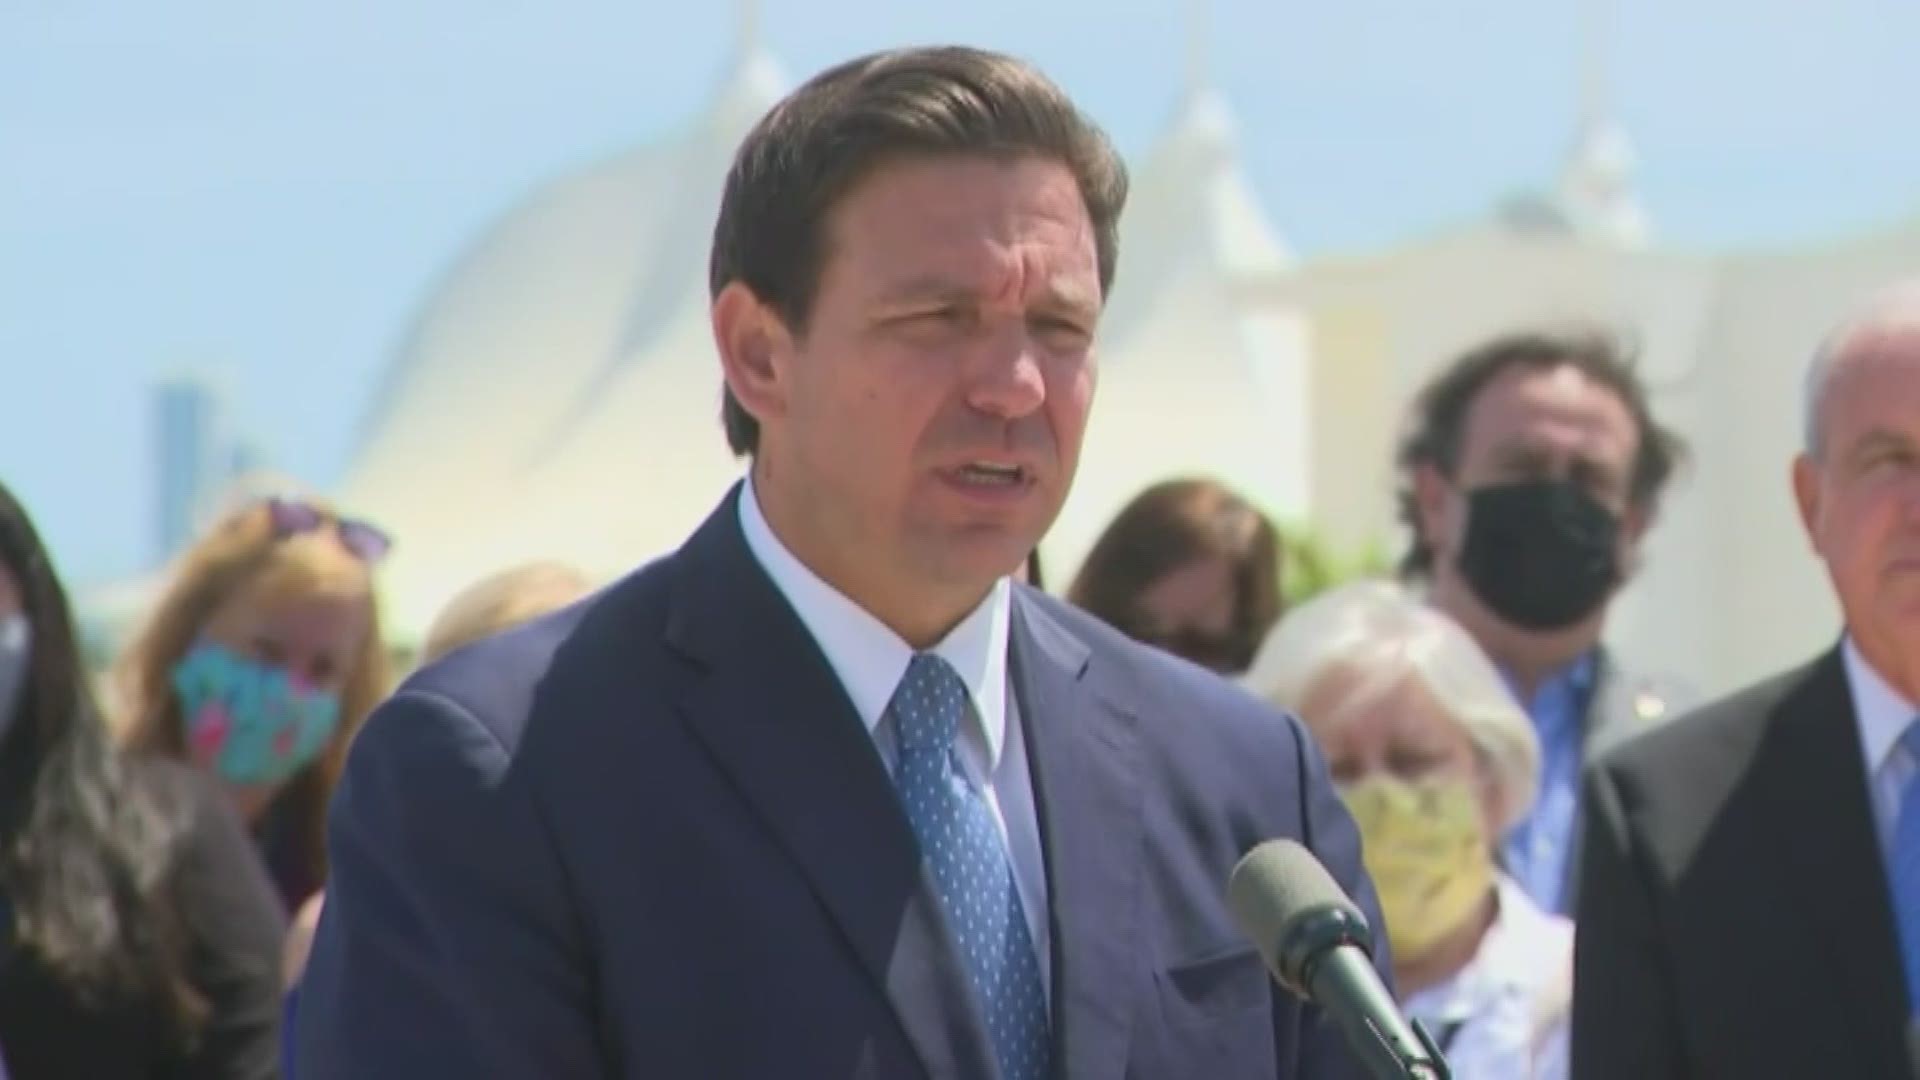 During a press conference in Miami on Thursday, Florida Governor Ron DeSantis announced that the state would be filing a lawsuit.